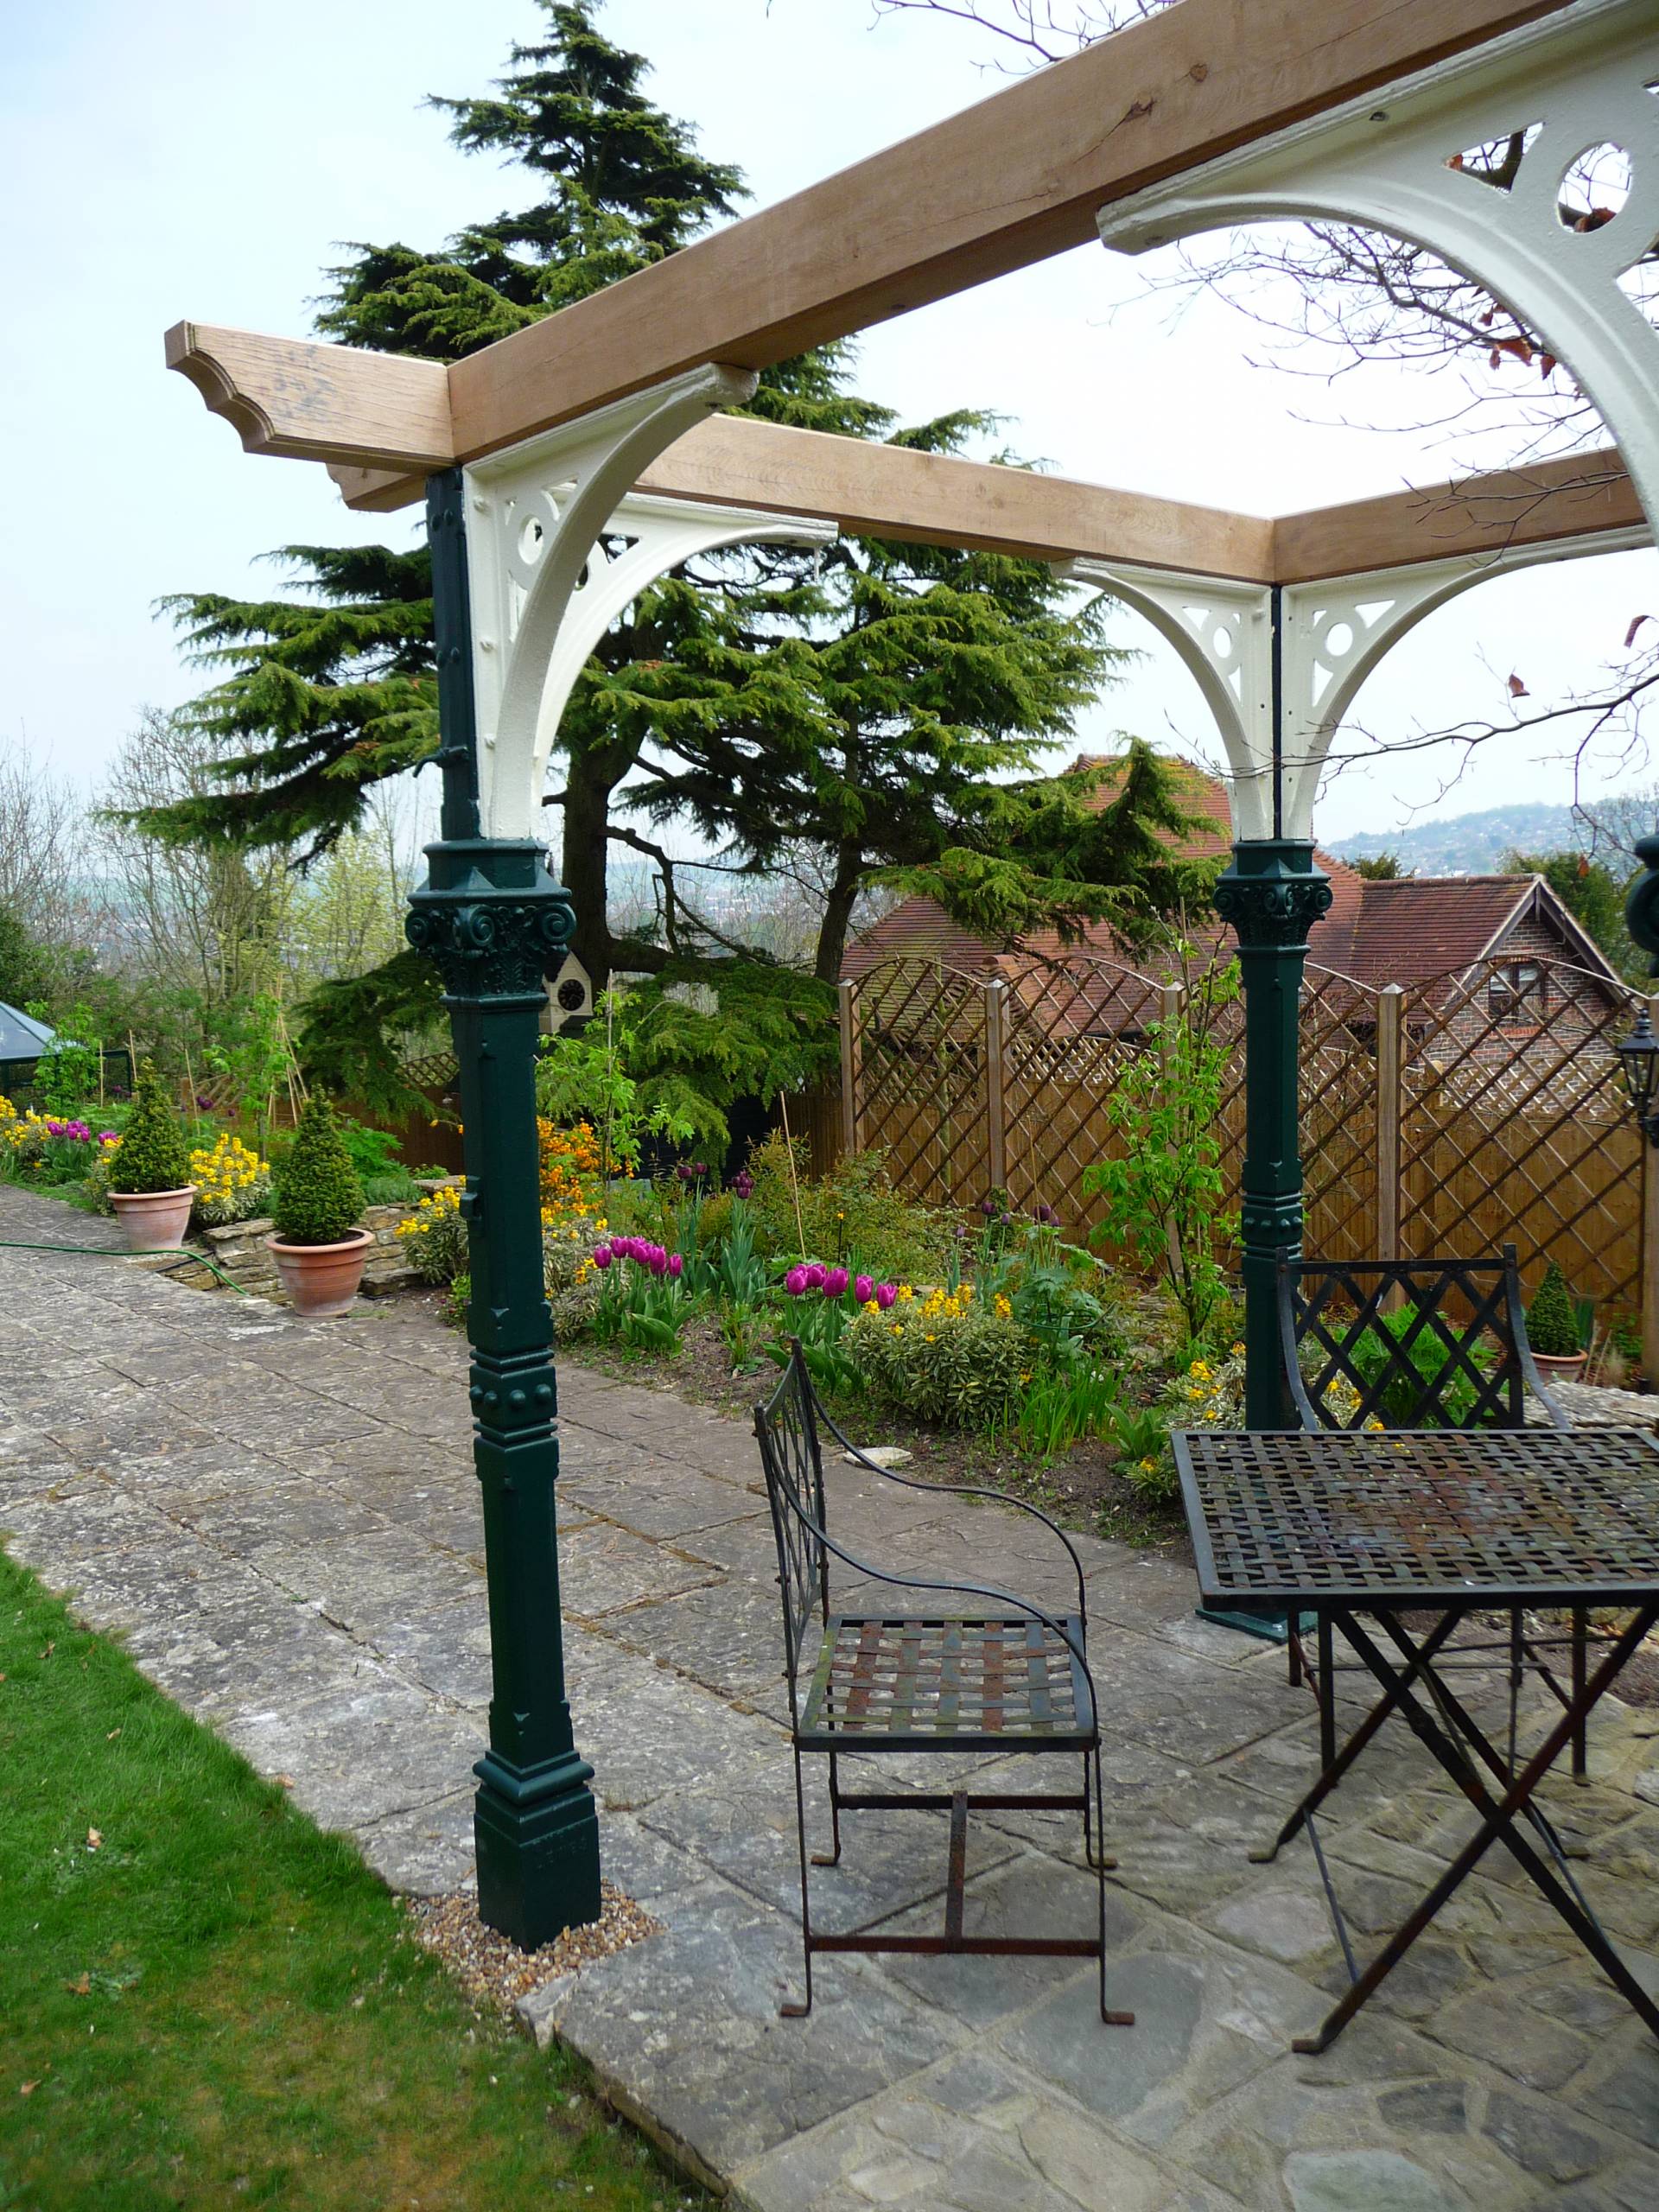 Reclaimed pillars from the West Pier in Brighton restored and installed into a garden in Withdean